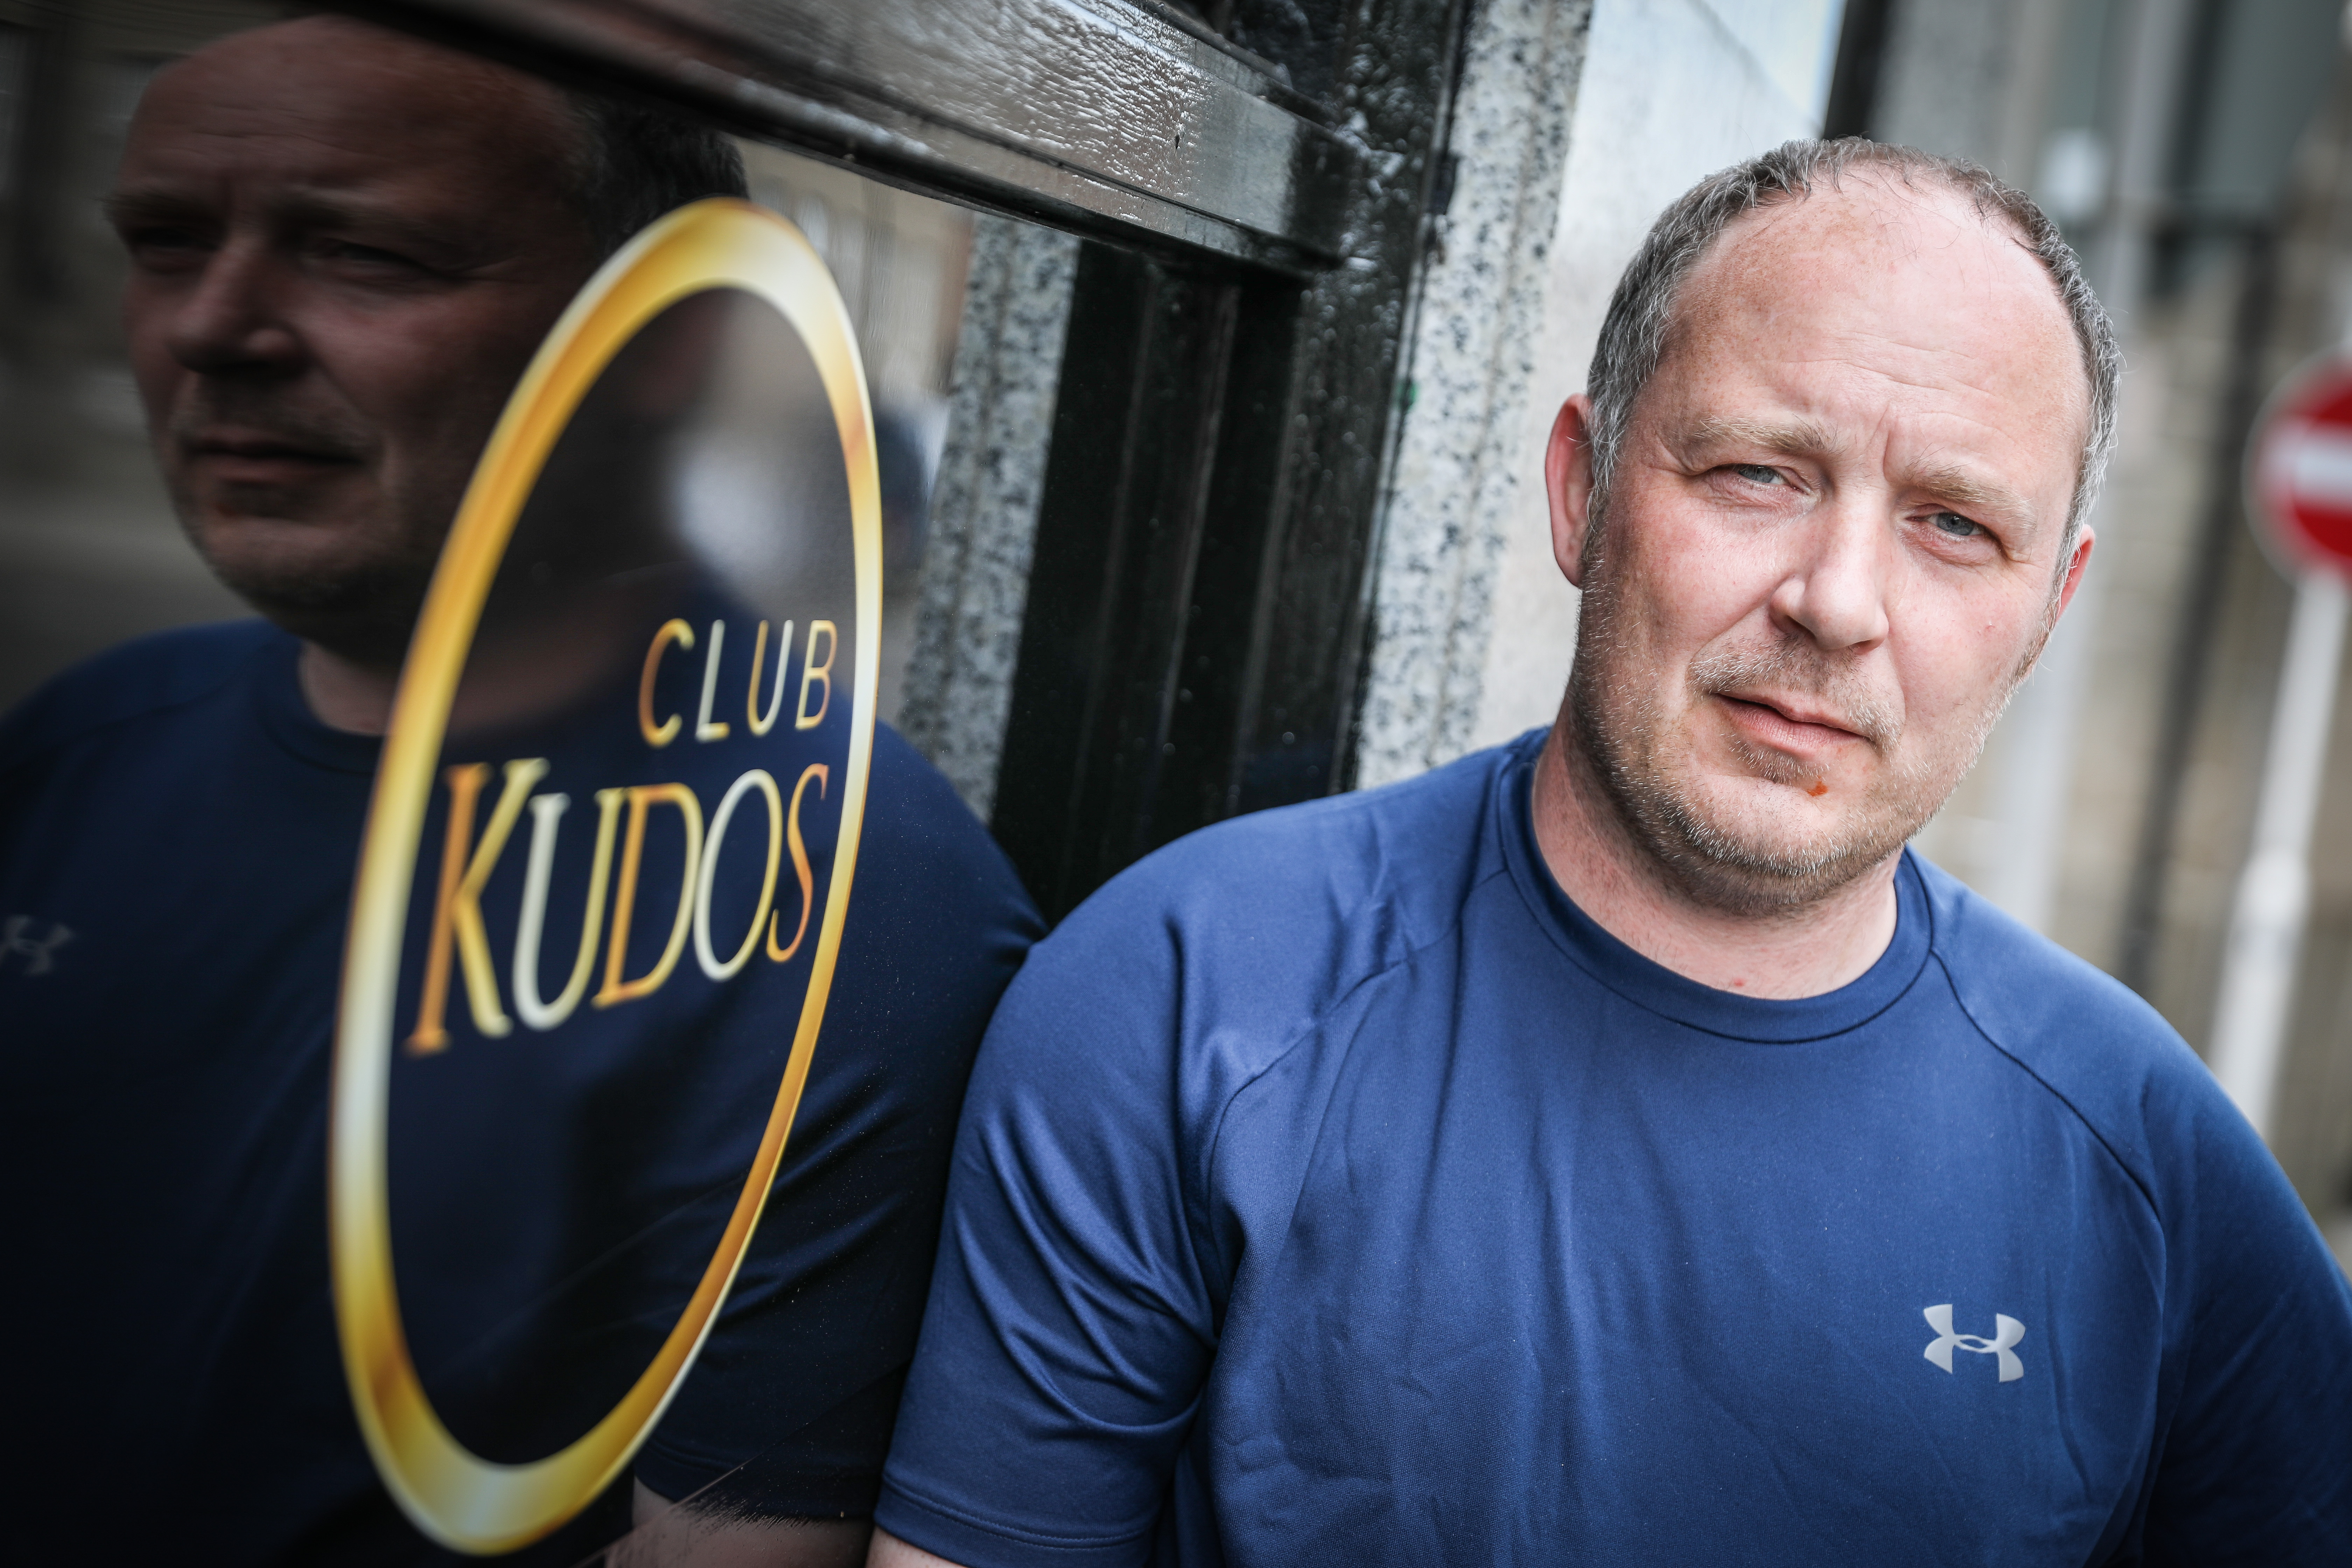 Scottish Government probing funding into Dundee sex club image